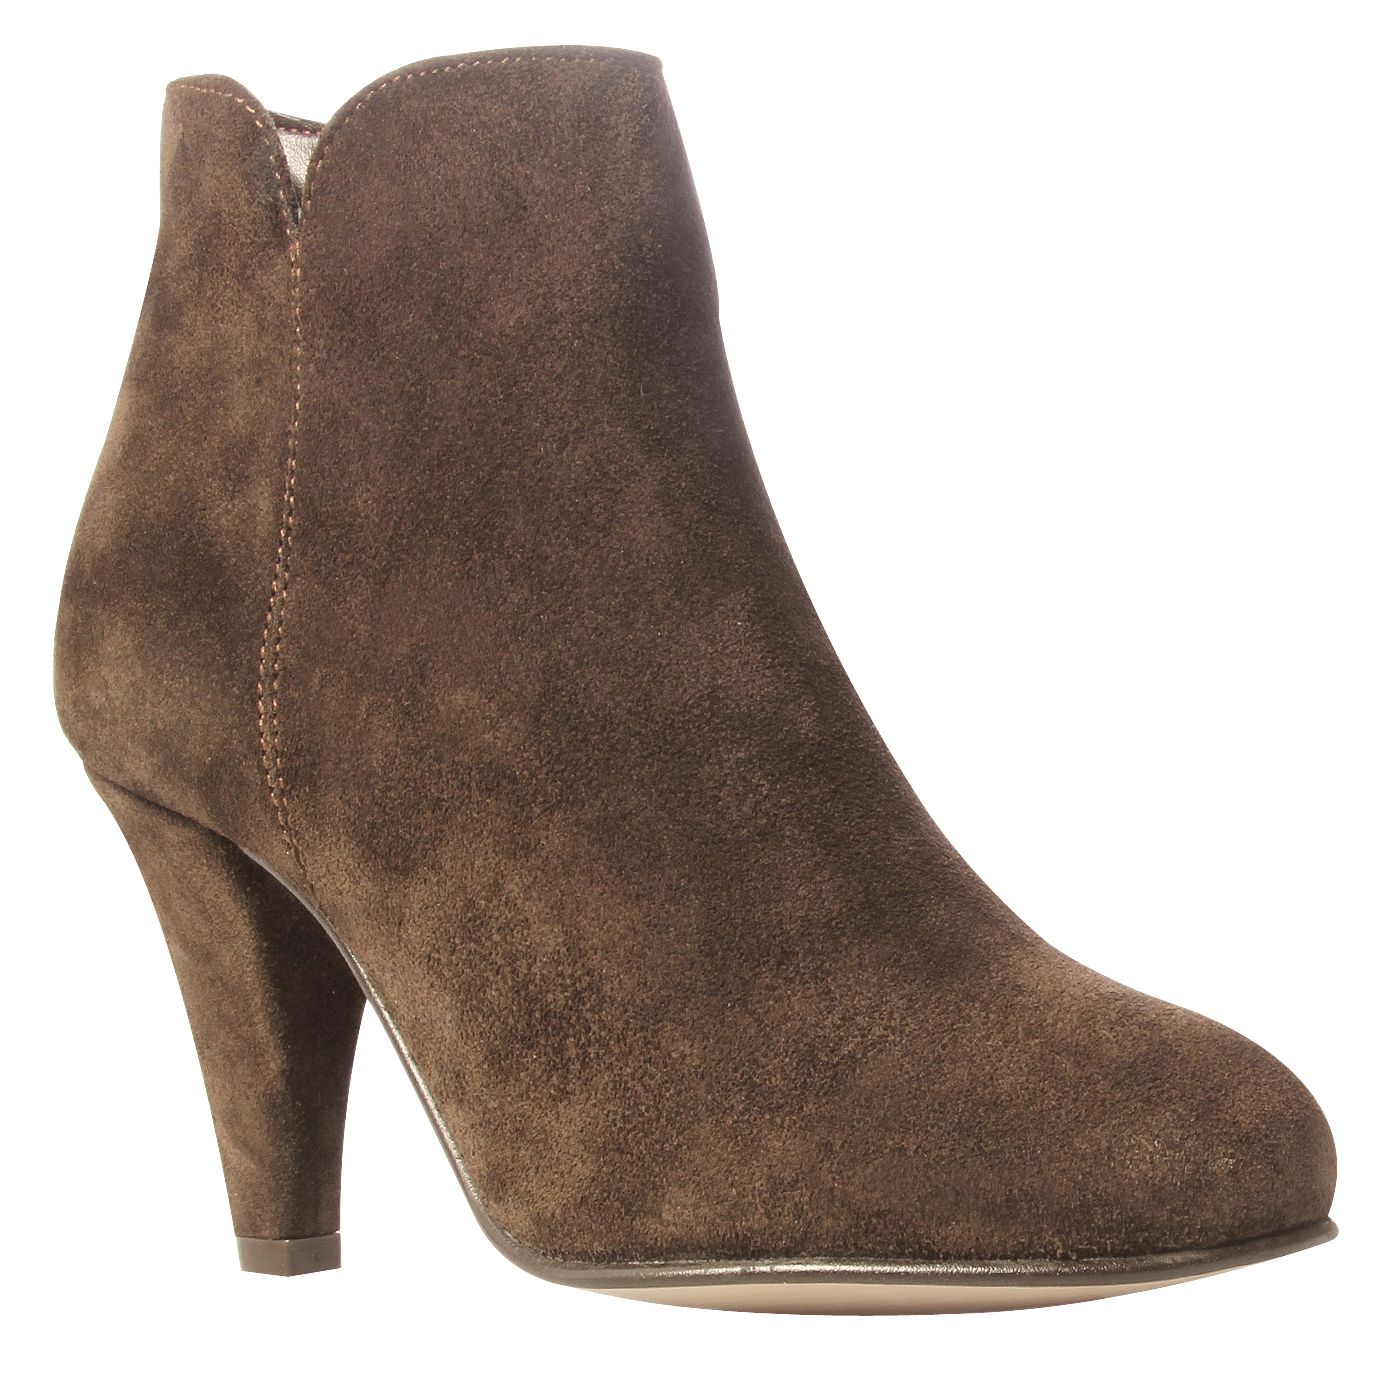 Carvela Suzie Suede Ankle Boots, Brown at John Lewis